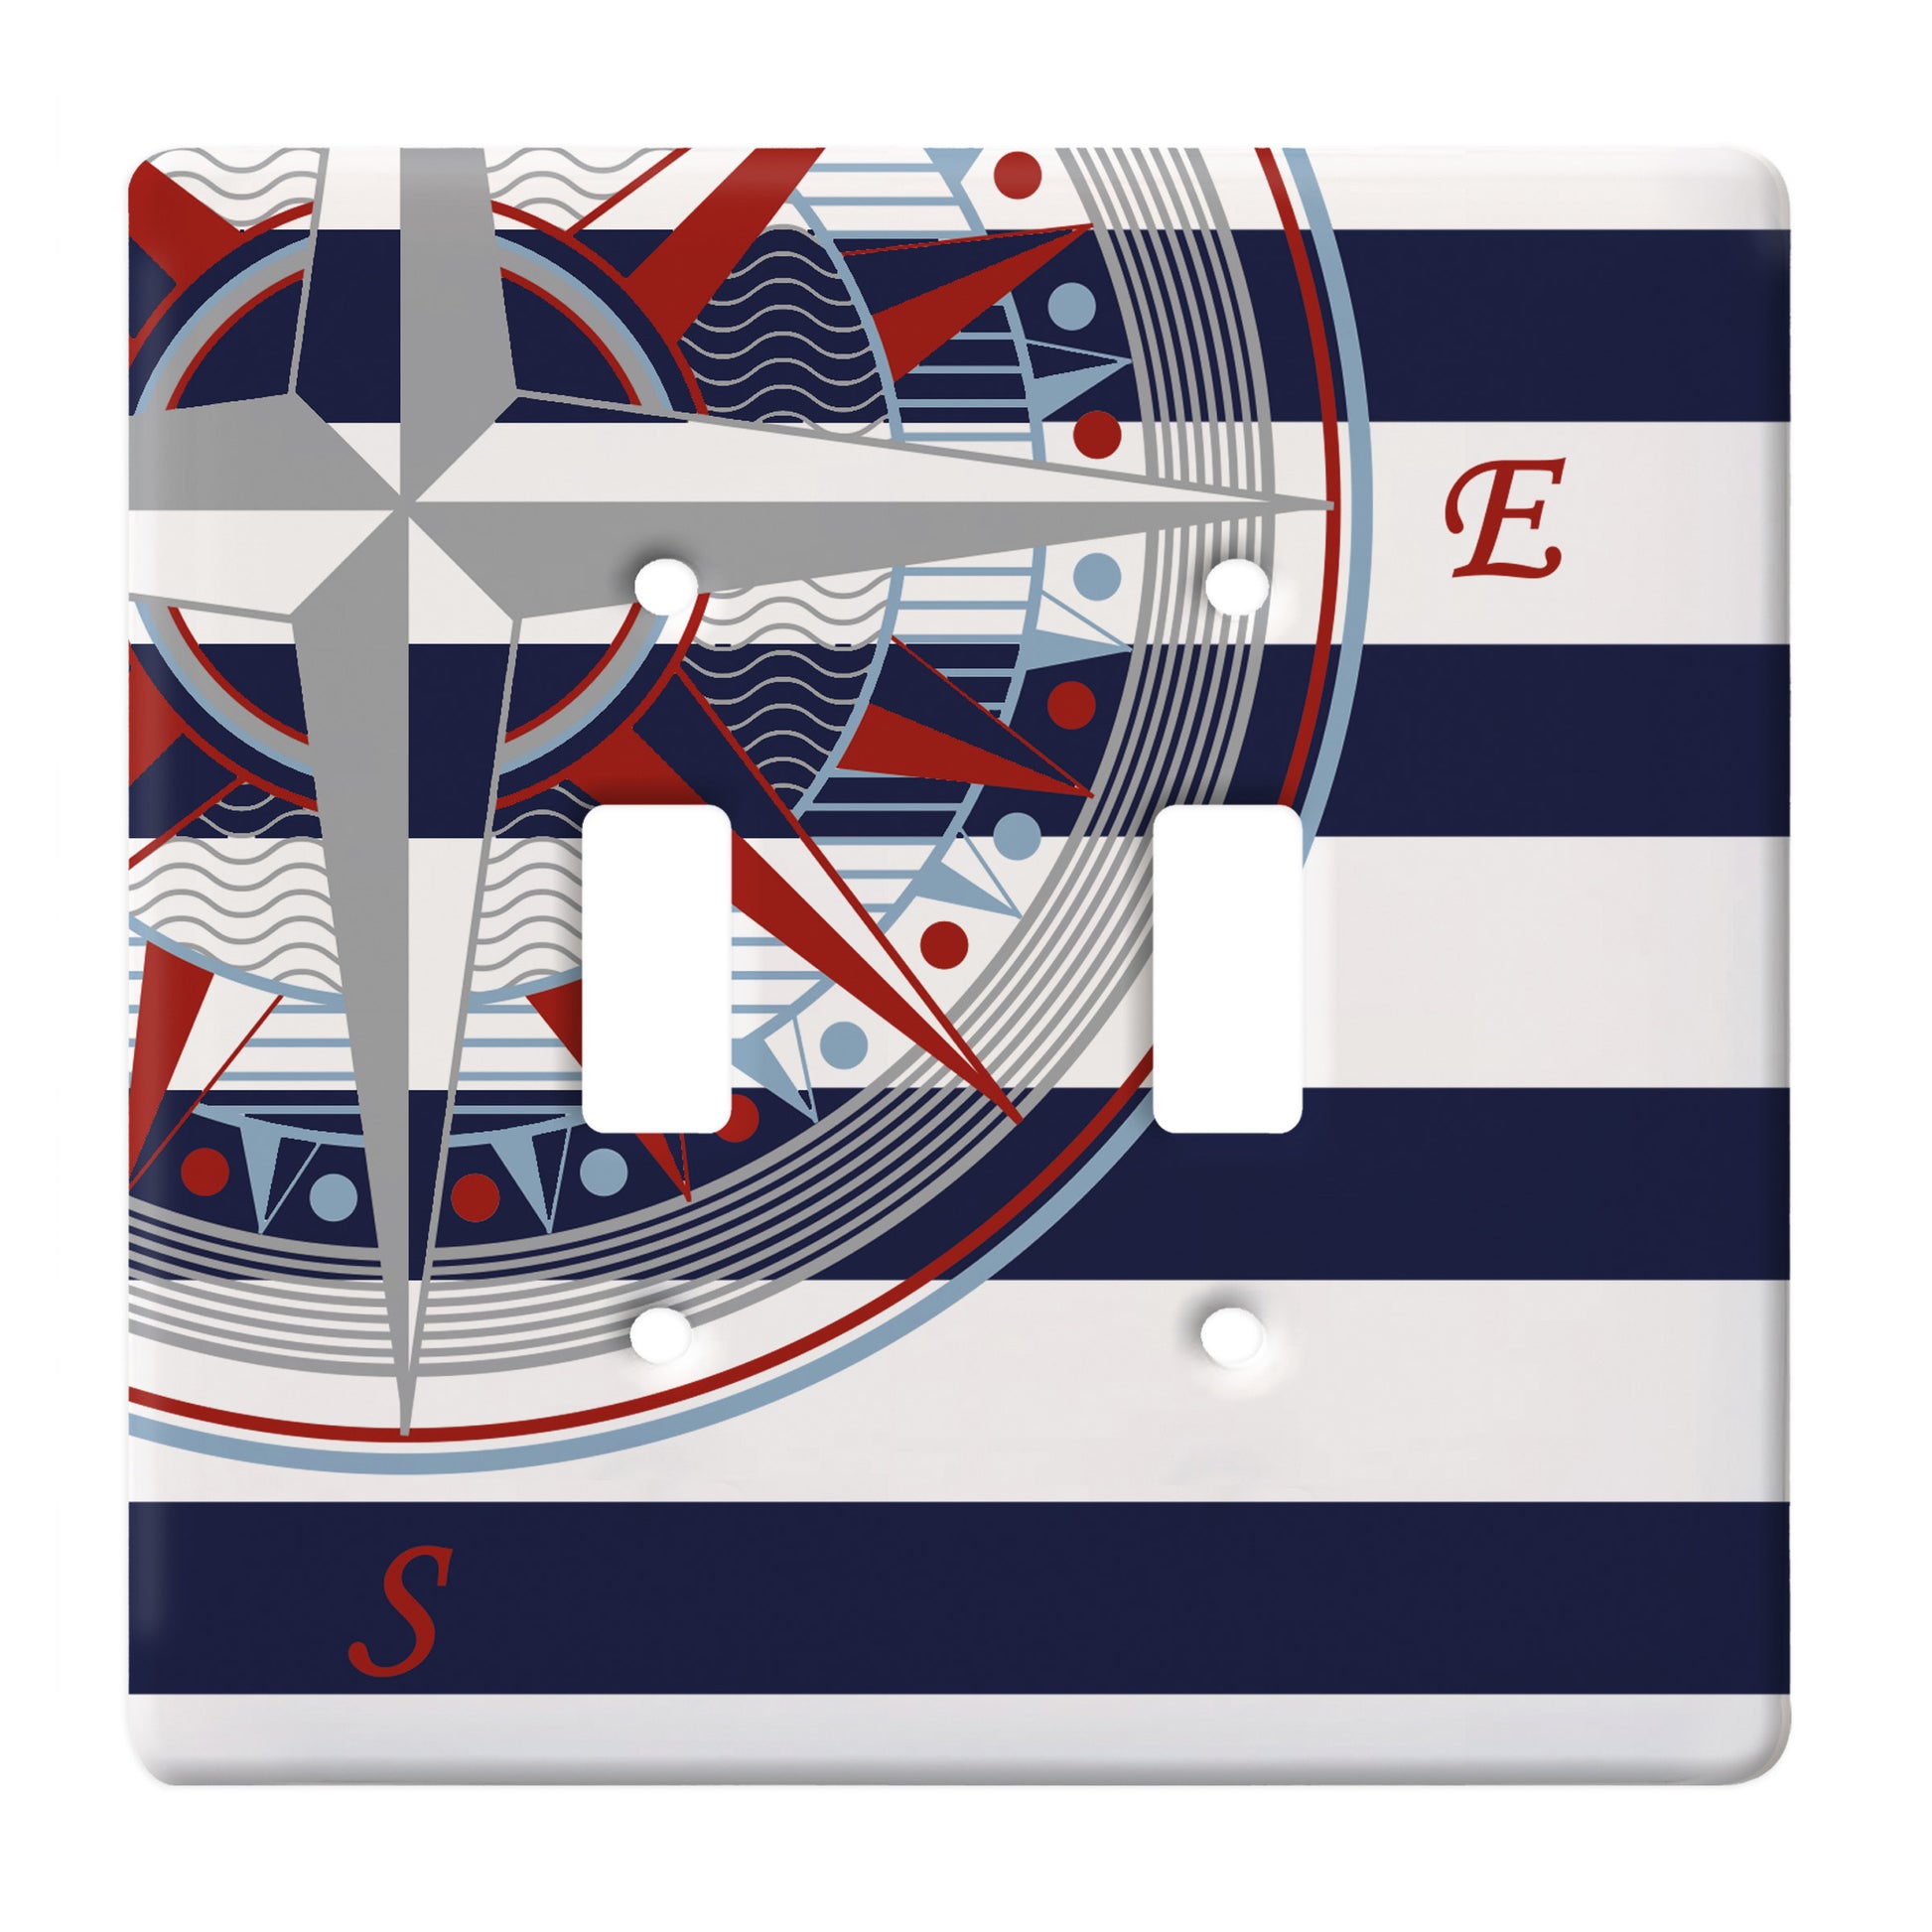 ceramic double toggle switch plate featuring navy and white stripes behind a nautical compass graphic.